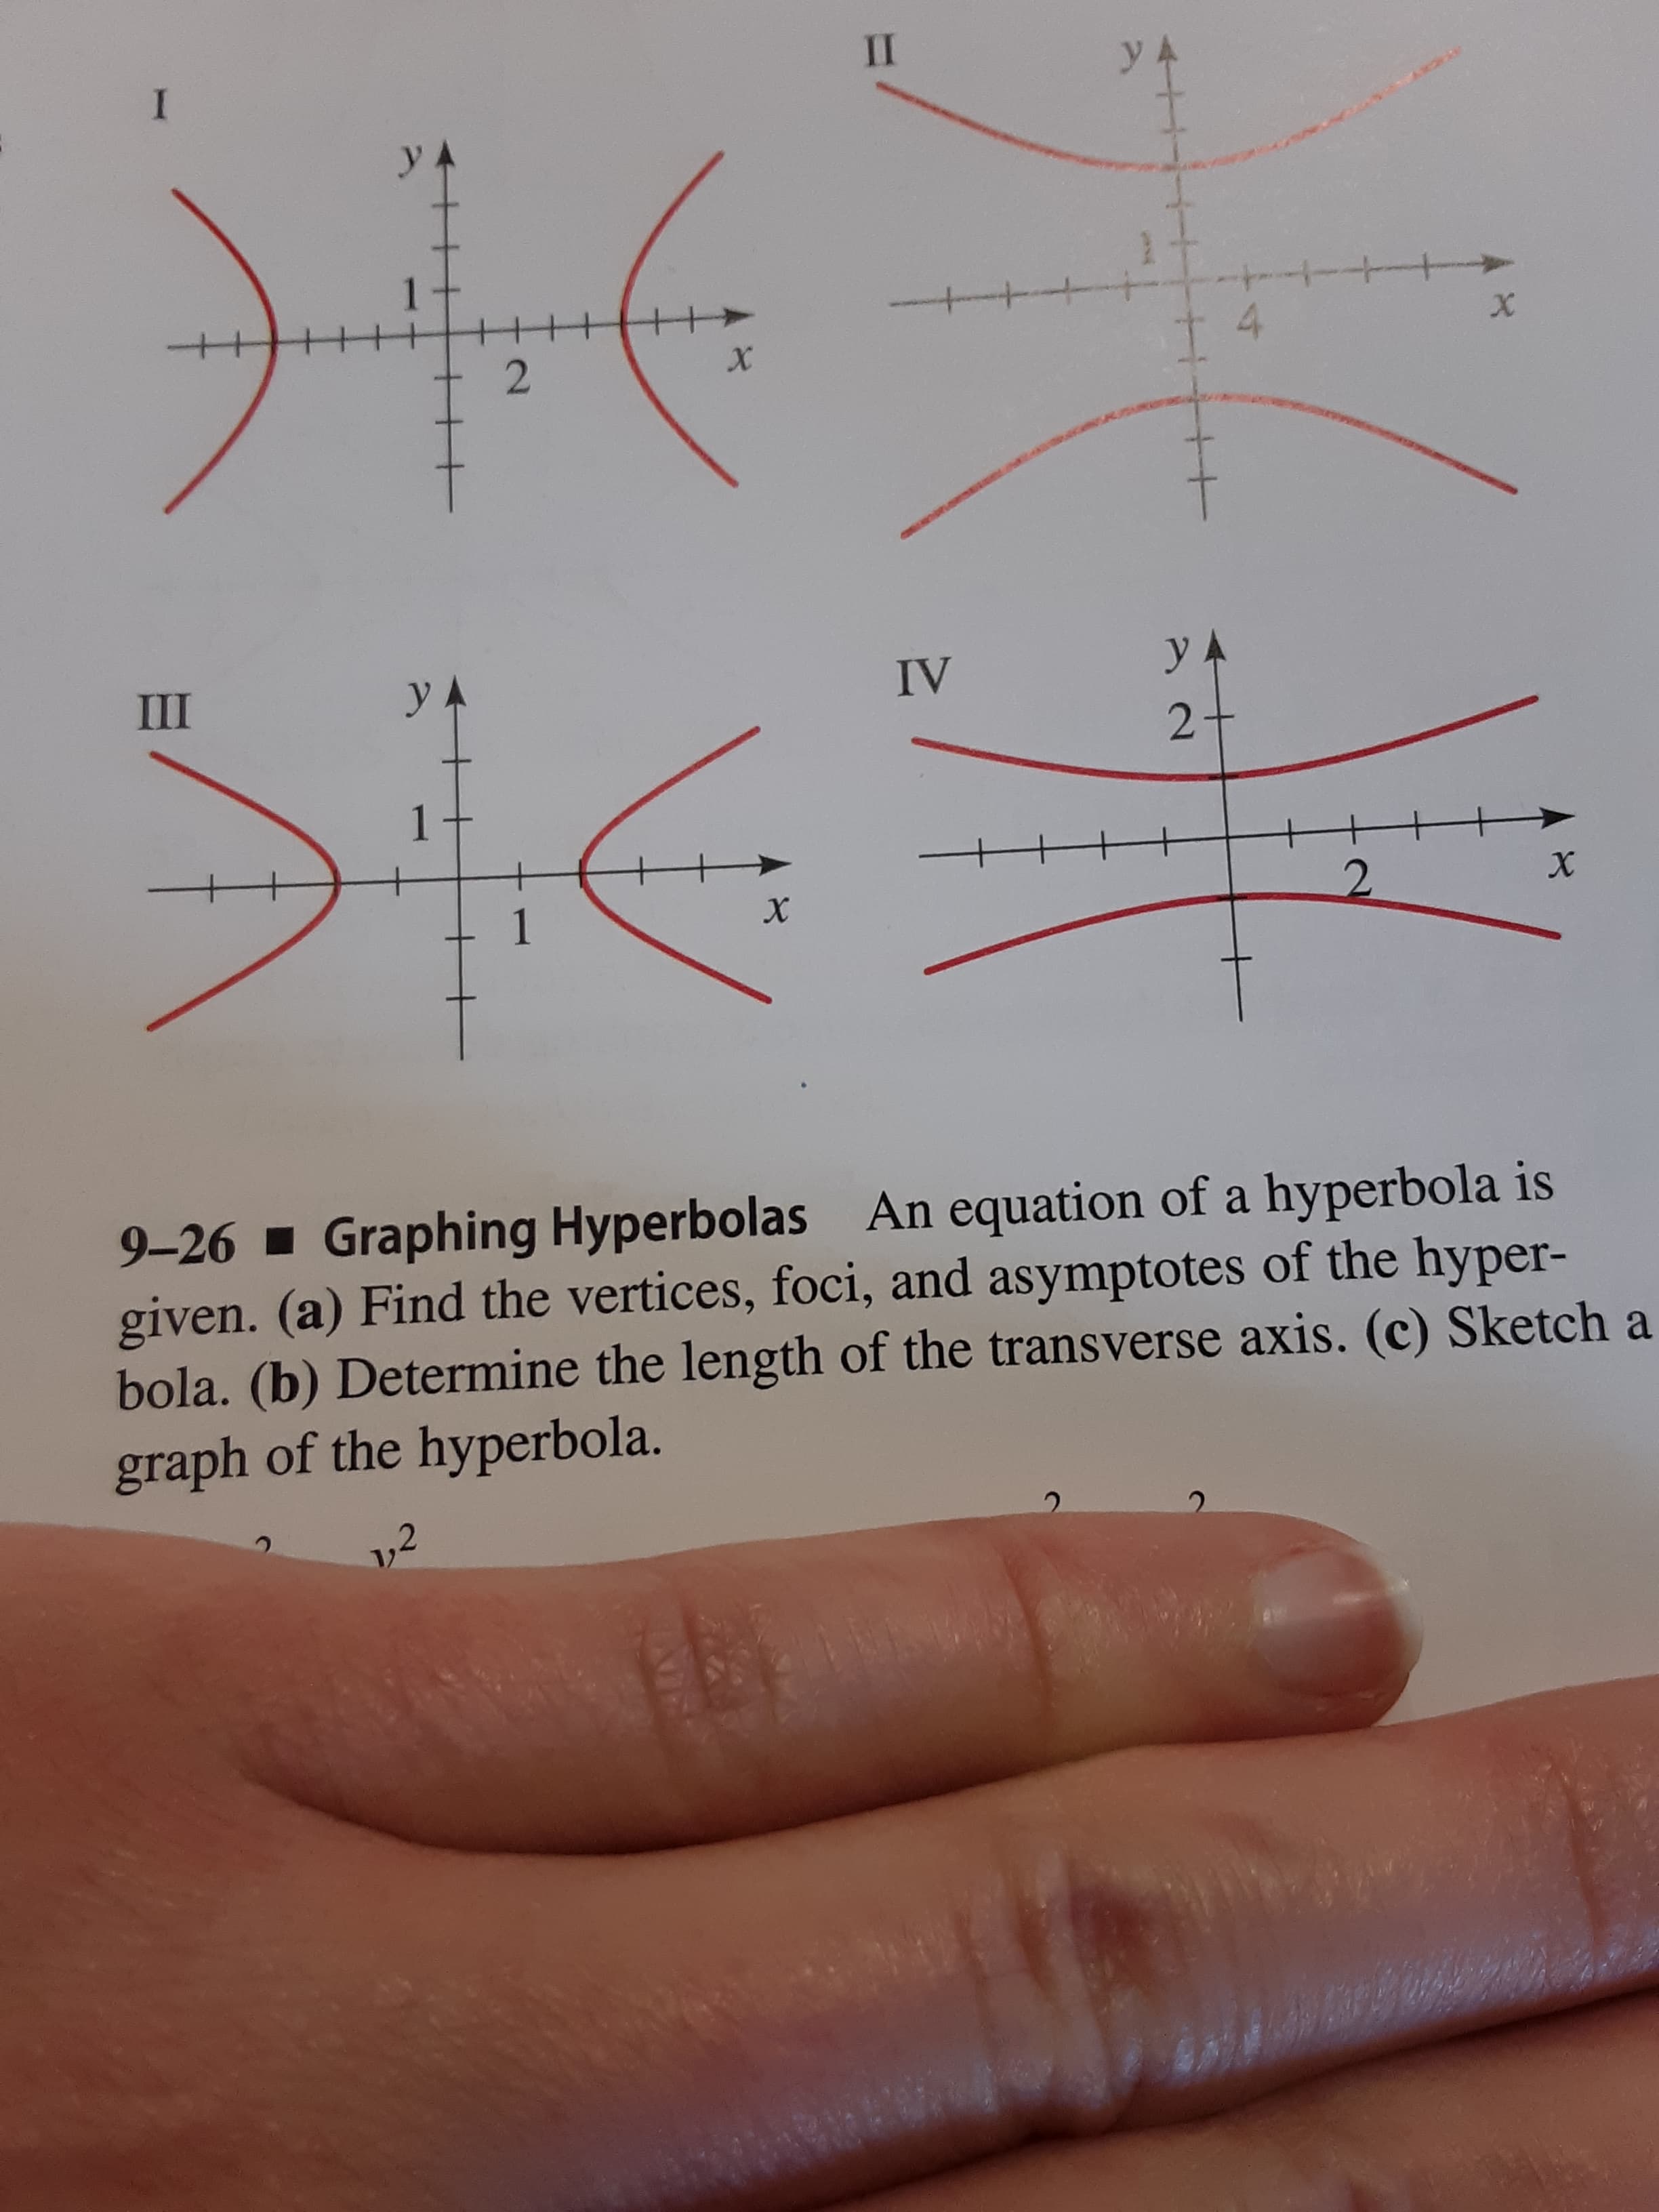 П
I
YA
у.
4
2
X
Ш
yA
у
IV
2
1
2
х
х
9-26 Graphing Hyperbolas An equation of a hyperbola is
given. (a) Find the vertices, foci, and asymptotes of the hyper-
bola. (b) Determine the length of the transverse axis. (c) Sketch a
graph of the hyperbola.
1,2
2
+t
